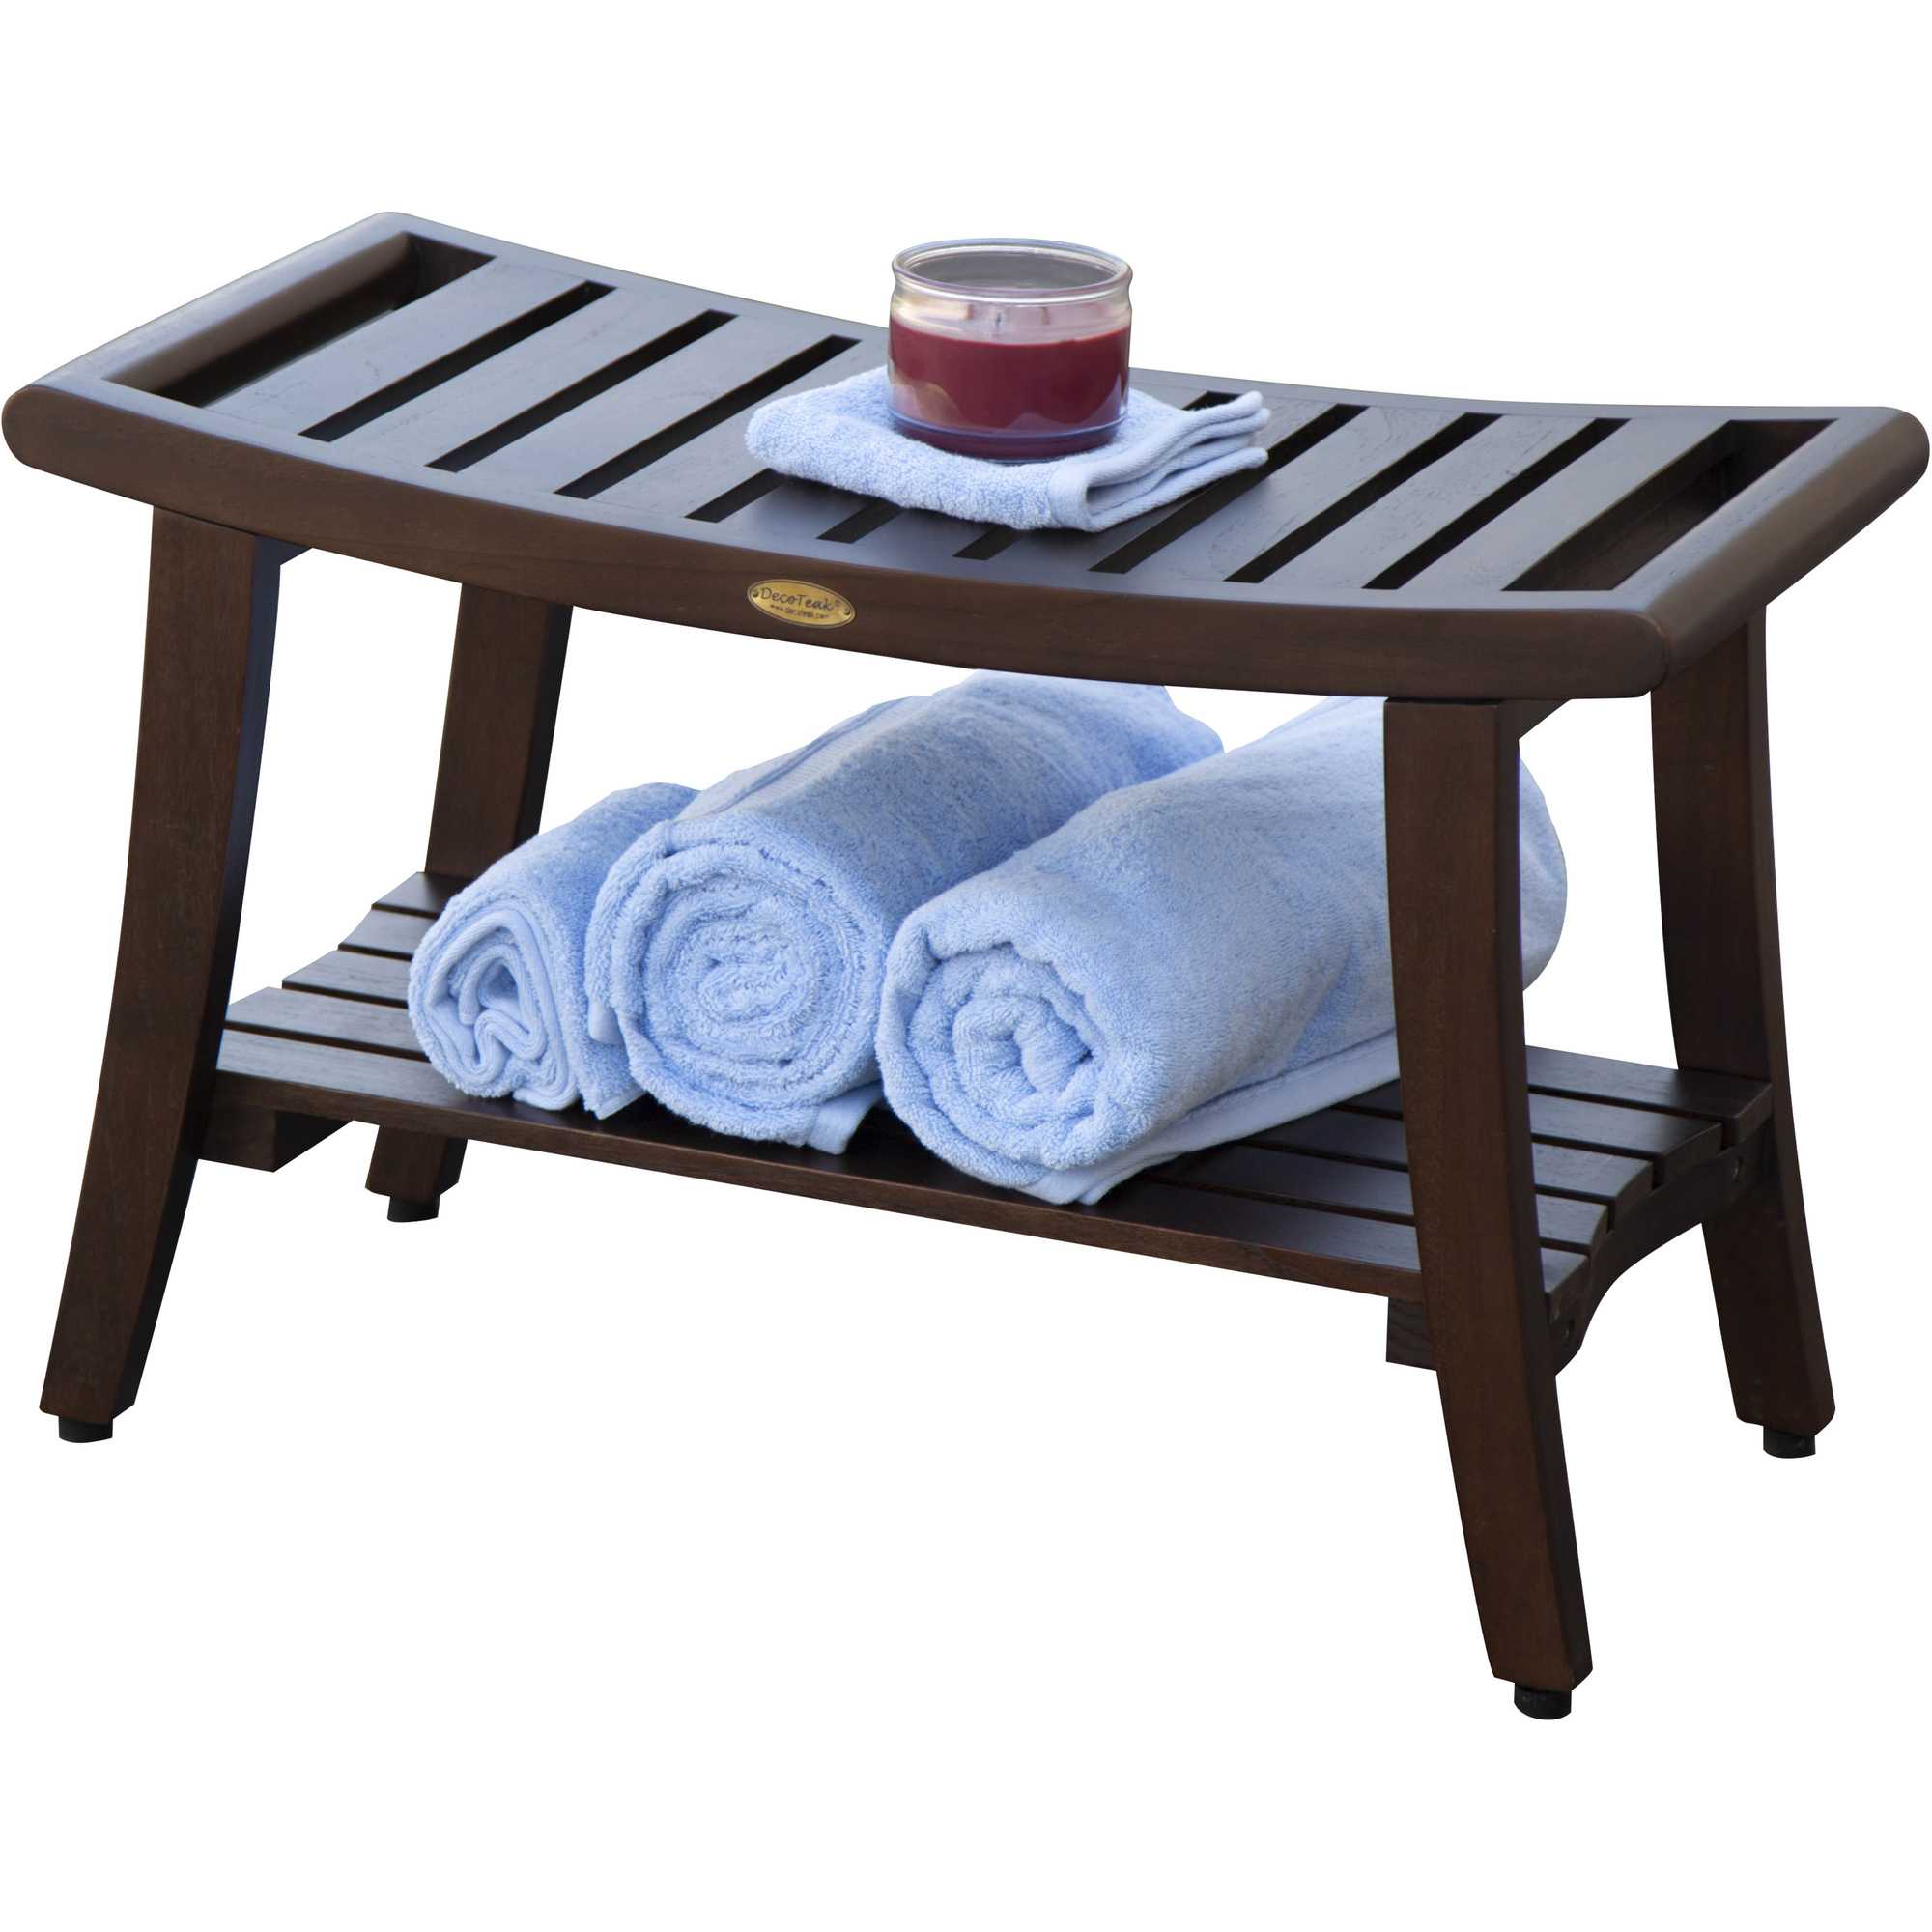 Contemporary Teak Shower Bench with Handles in Brown Finish